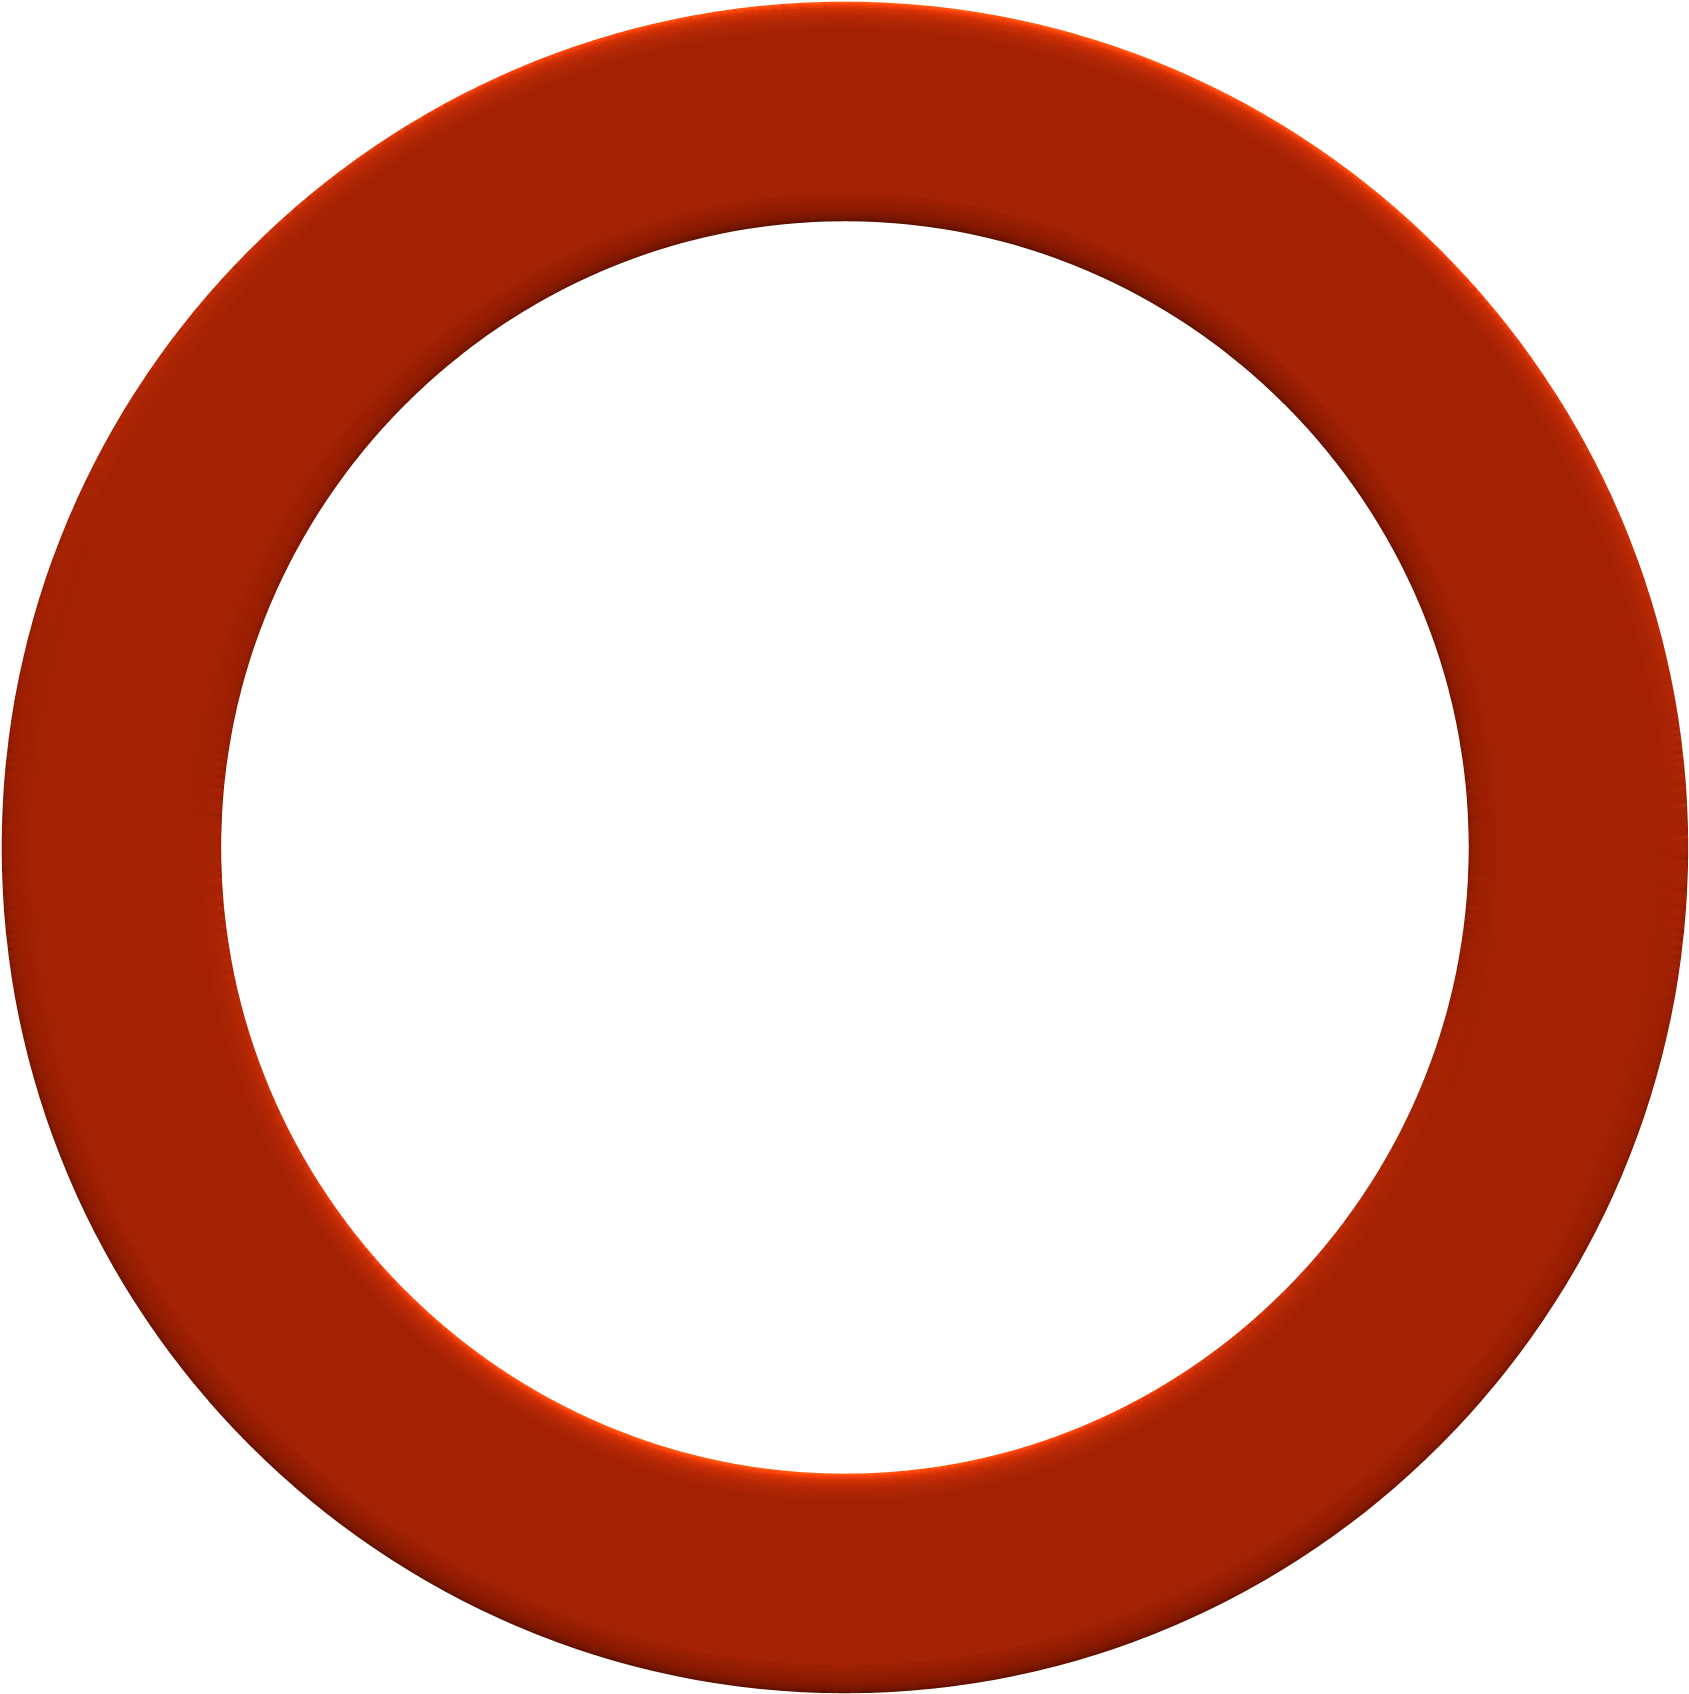 Circle Frame Clip Art - Red Circle Sign Meaning (1800x1800)